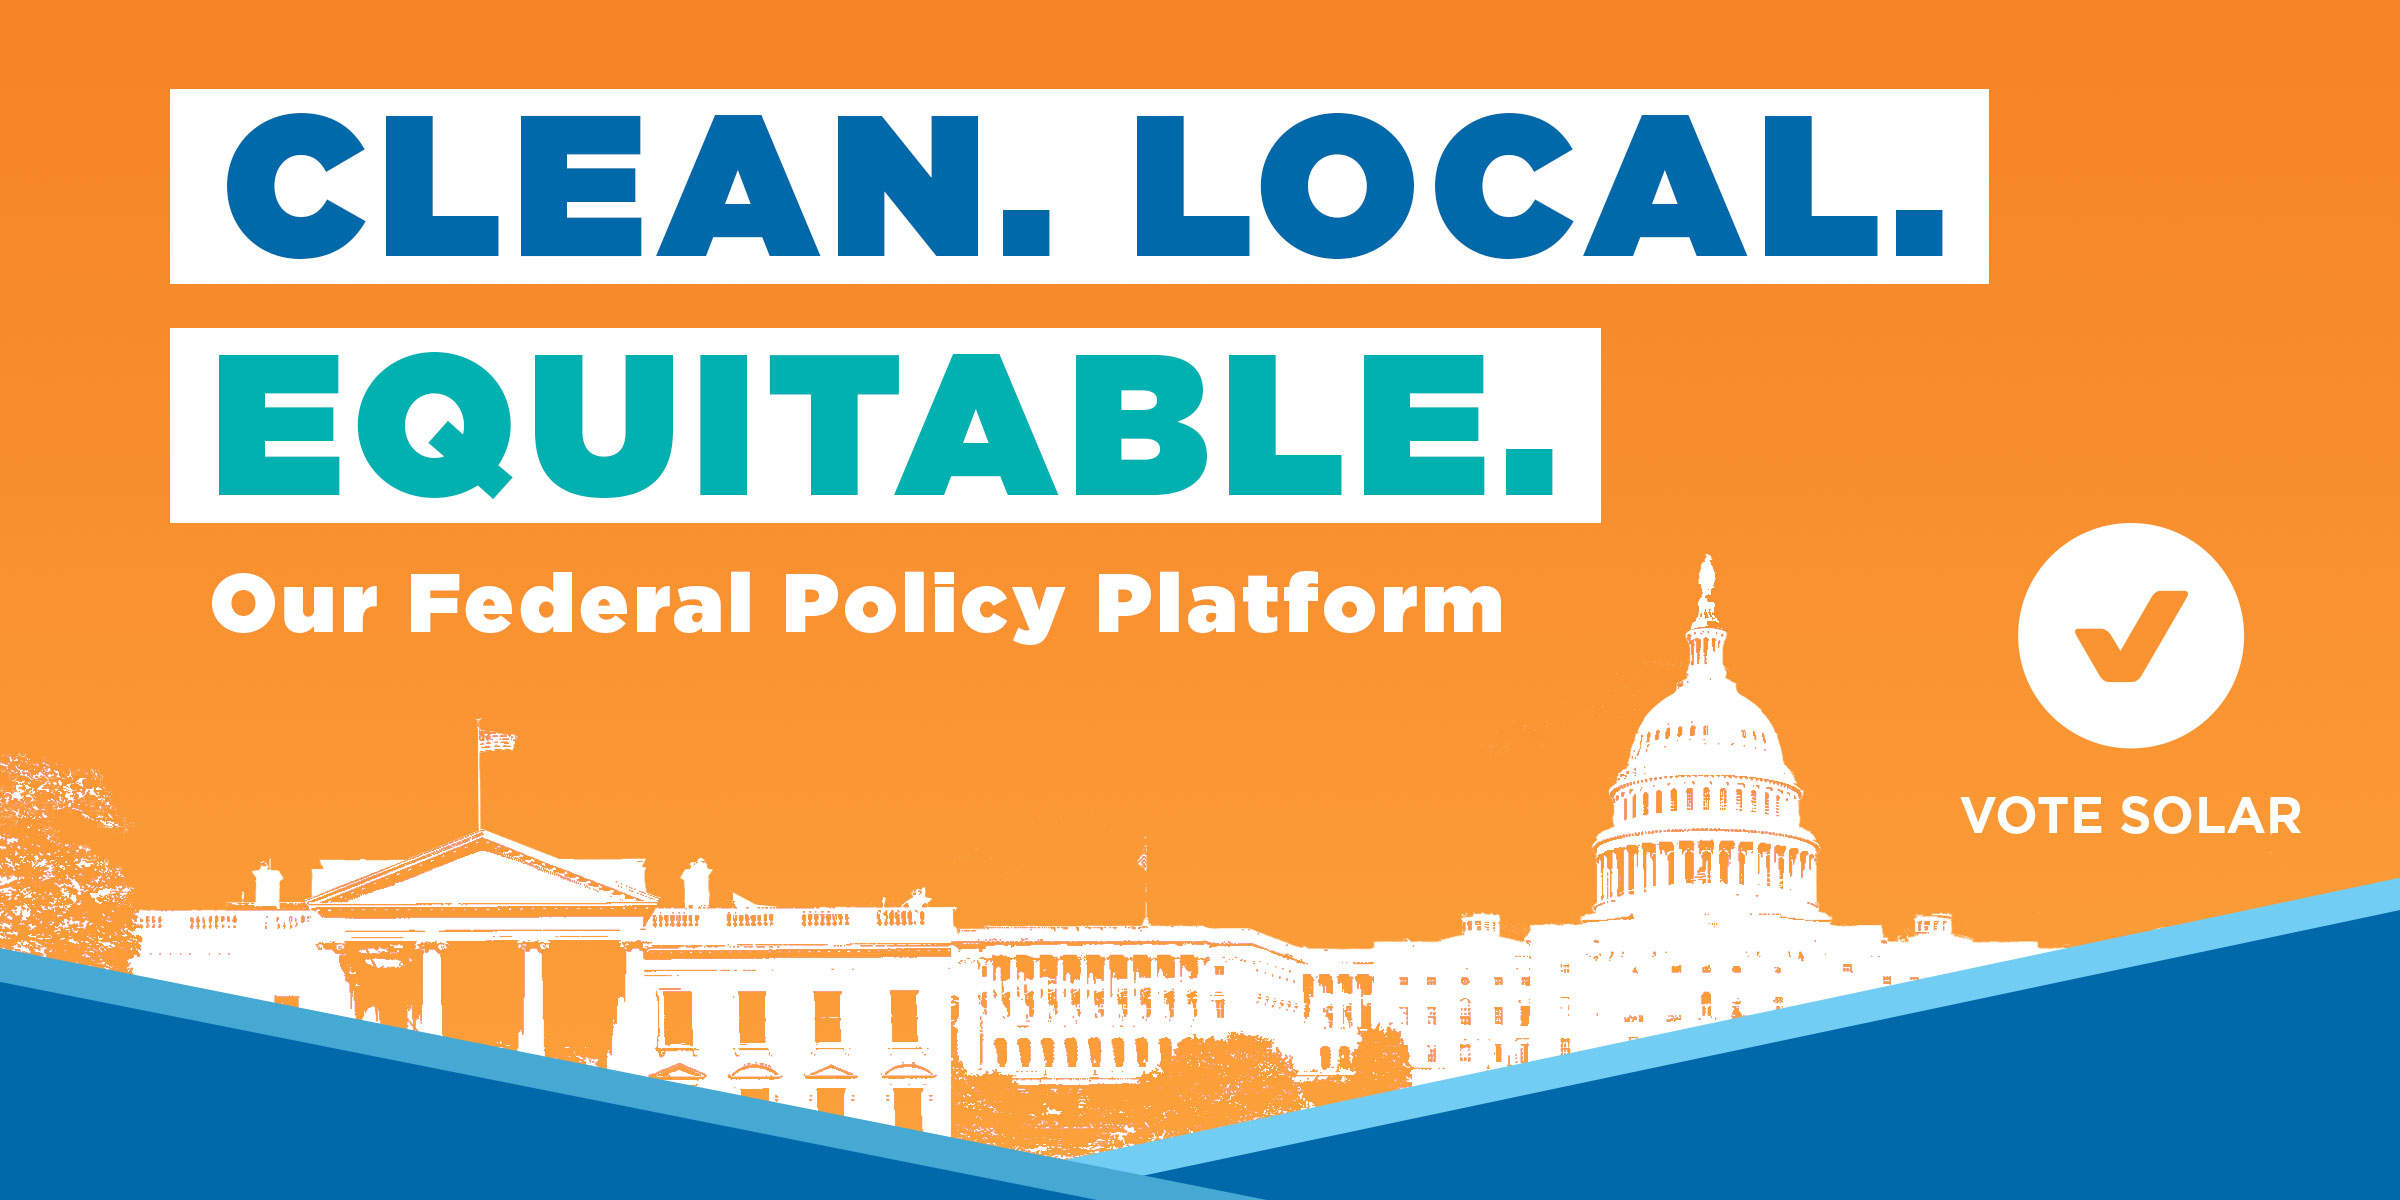 Clean. Local. Equitable. Our Federal Policy Platform